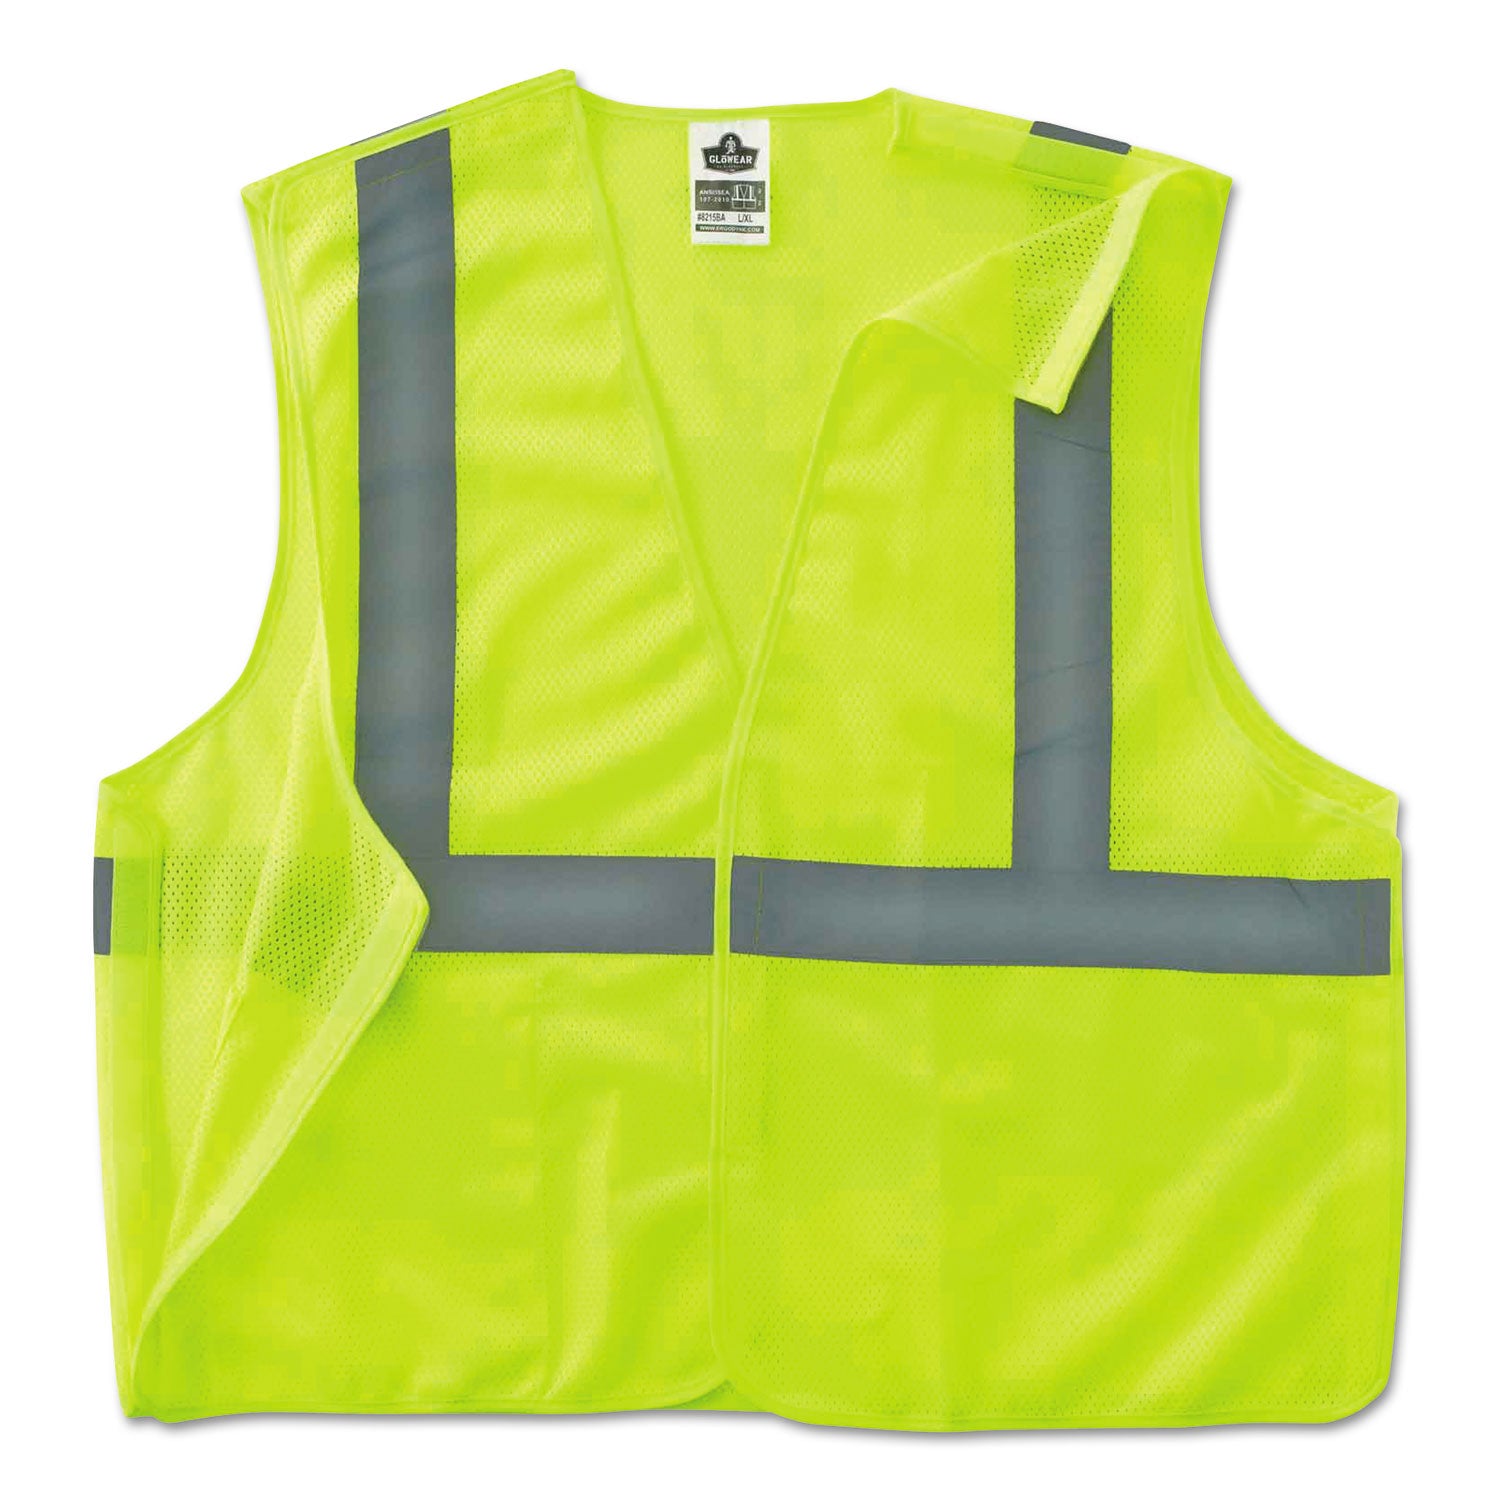 GloWear 8215BA Type R Class 2 Econo Breakaway Mesh Safety Vest, 2X-Large to 3X-Large, Lime, Ships in 1-3 Business Days - 